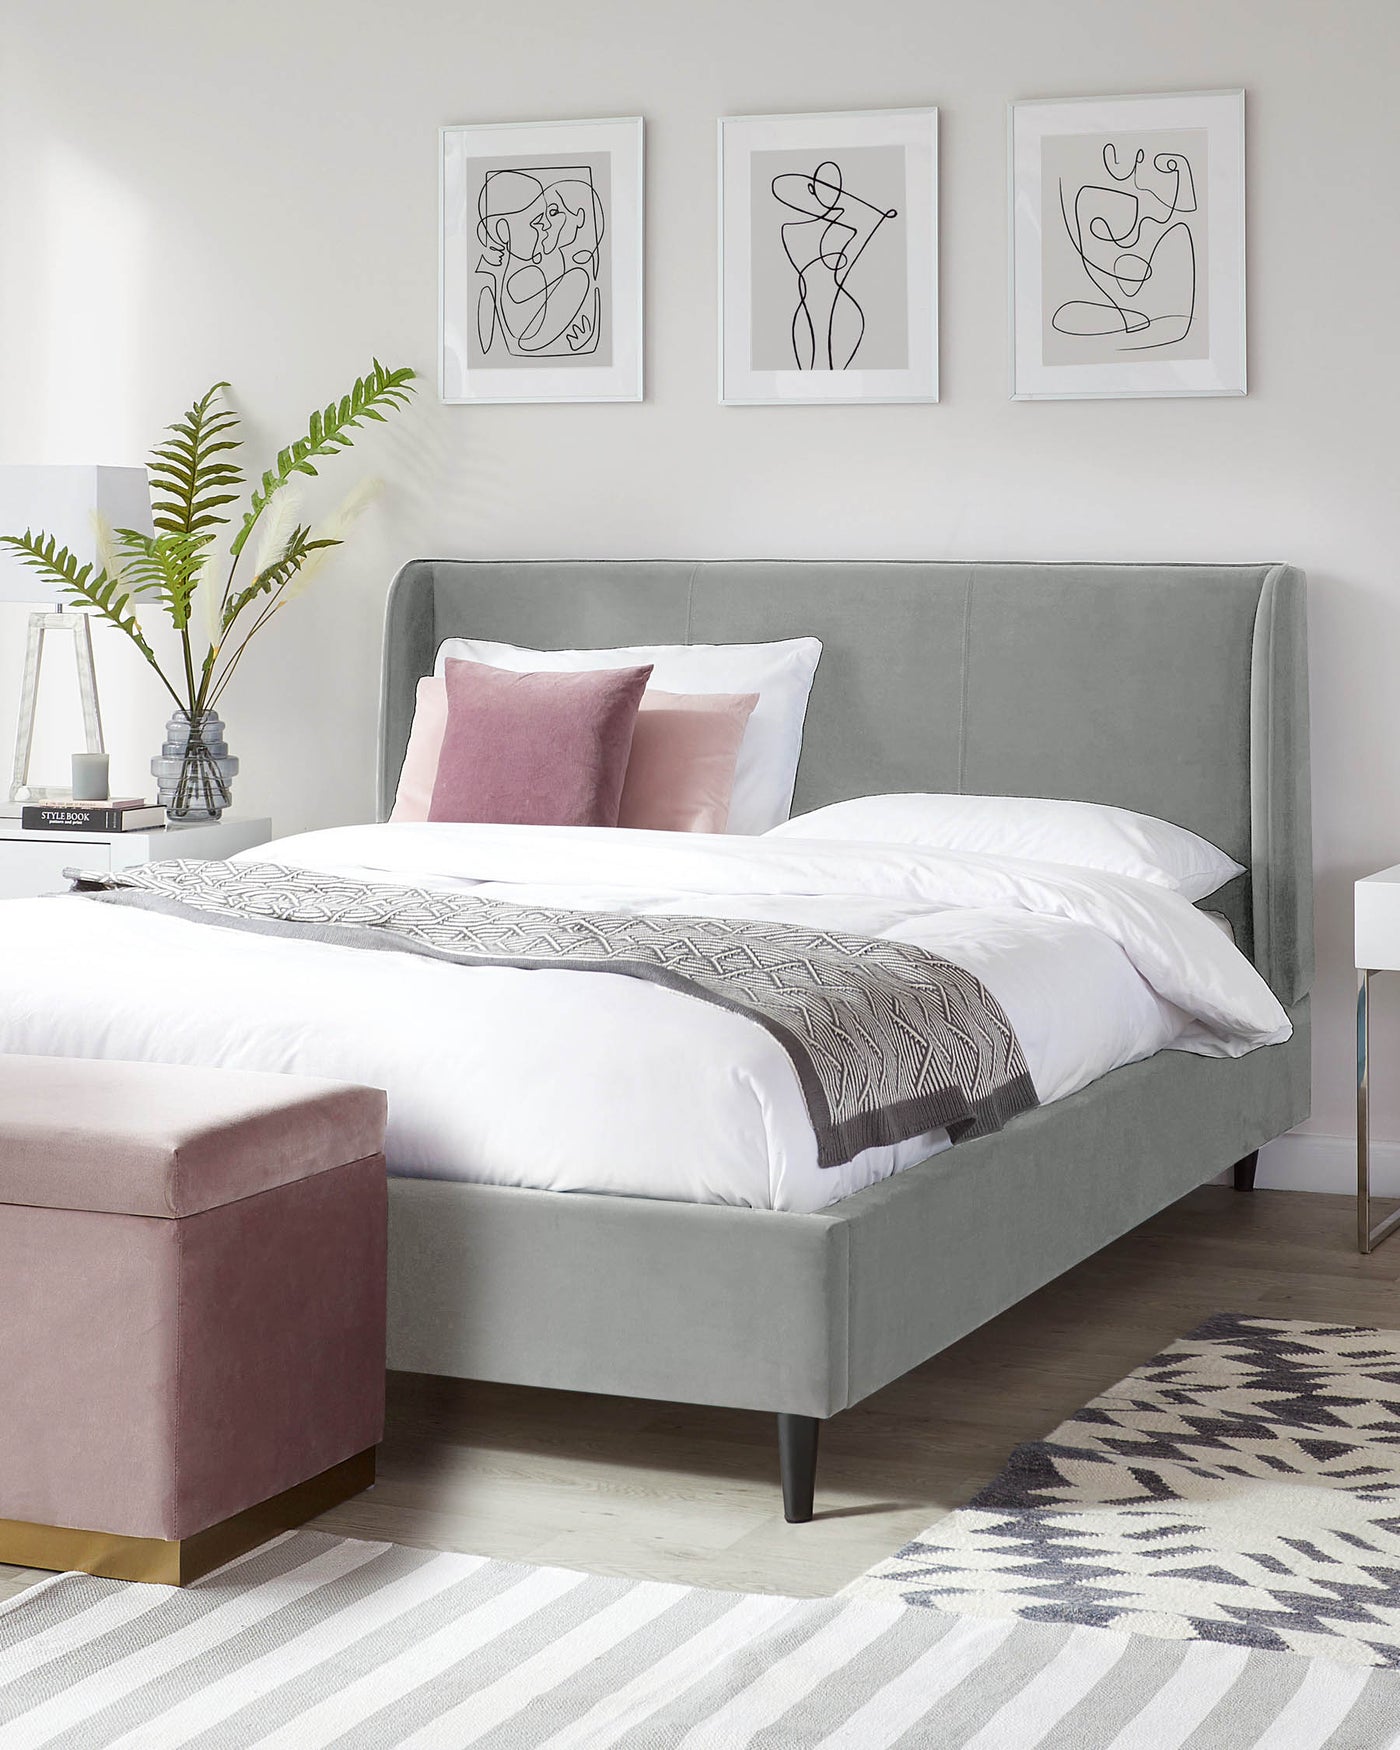 Elegant contemporary bedroom featuring a plush king-size bed with a curved, light grey upholstered headboard and frame on black tapered legs. At the foot of the bed sits a rectangular ottoman in a complementary dusky pink velvet with a metallic gold accent at the base. A minimalistic white side table is partially visible to the left. The space is accented by a grey and white striped area rug underneath.